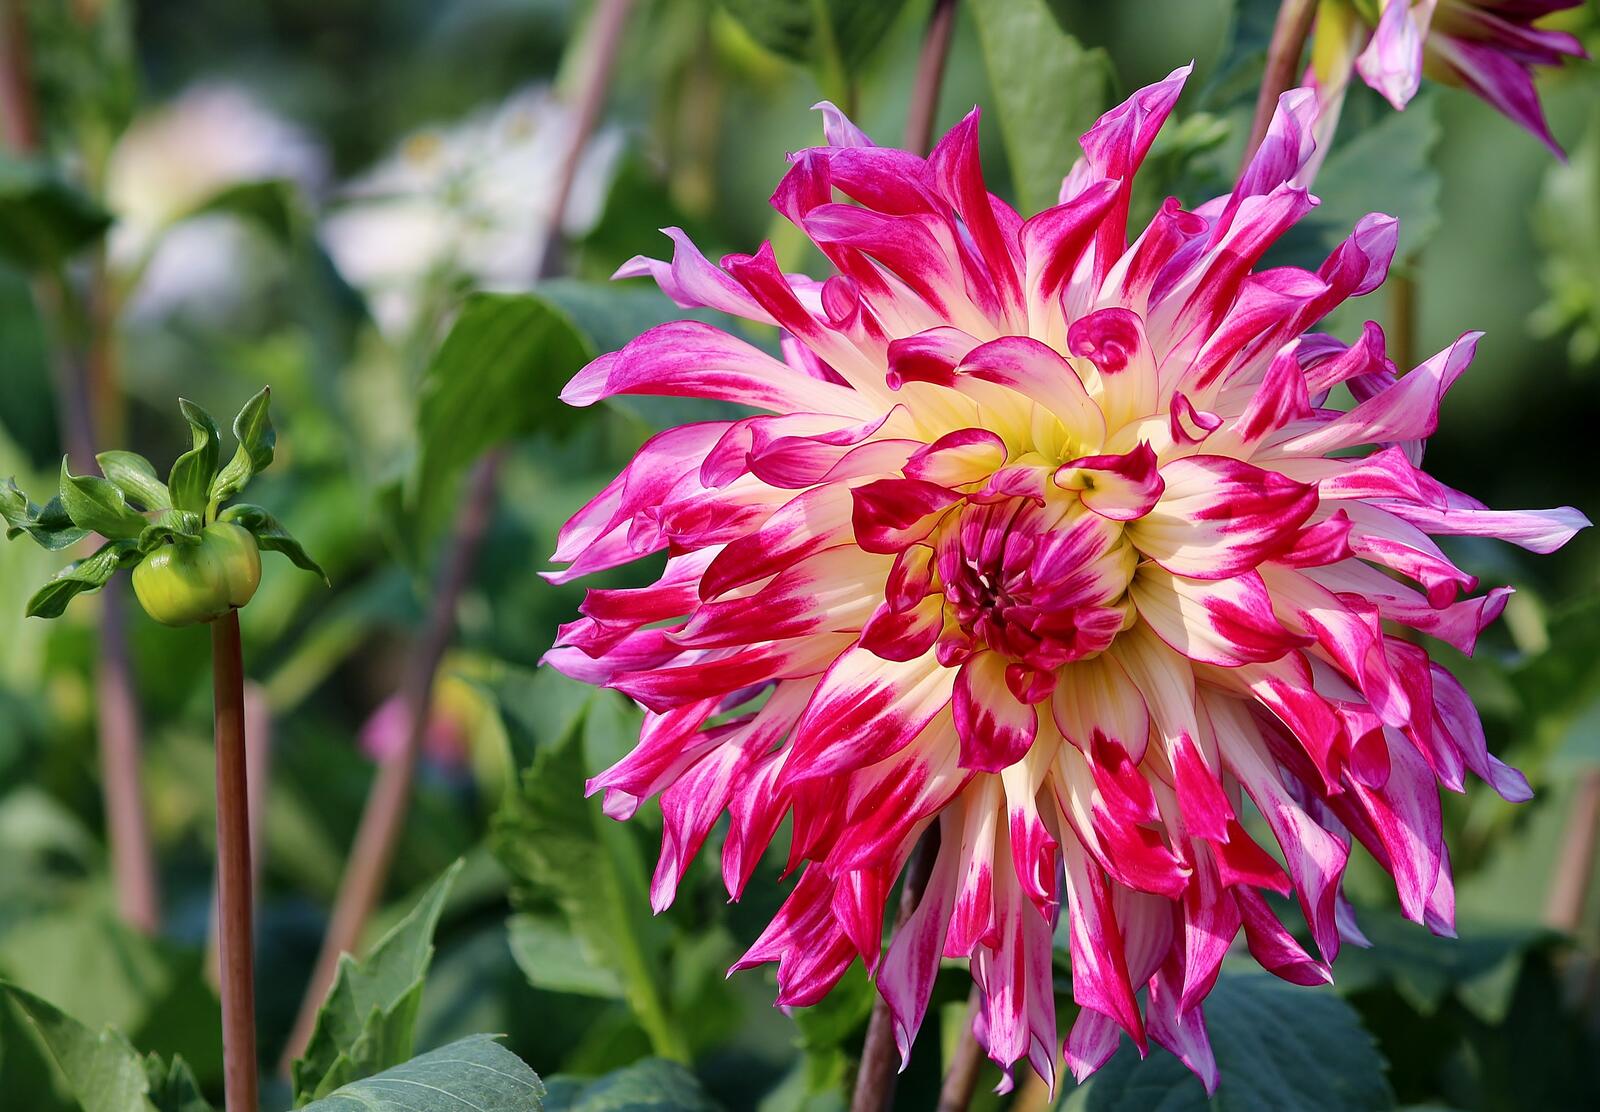 Free photo A beautiful pink dahlia flower from the daisy family